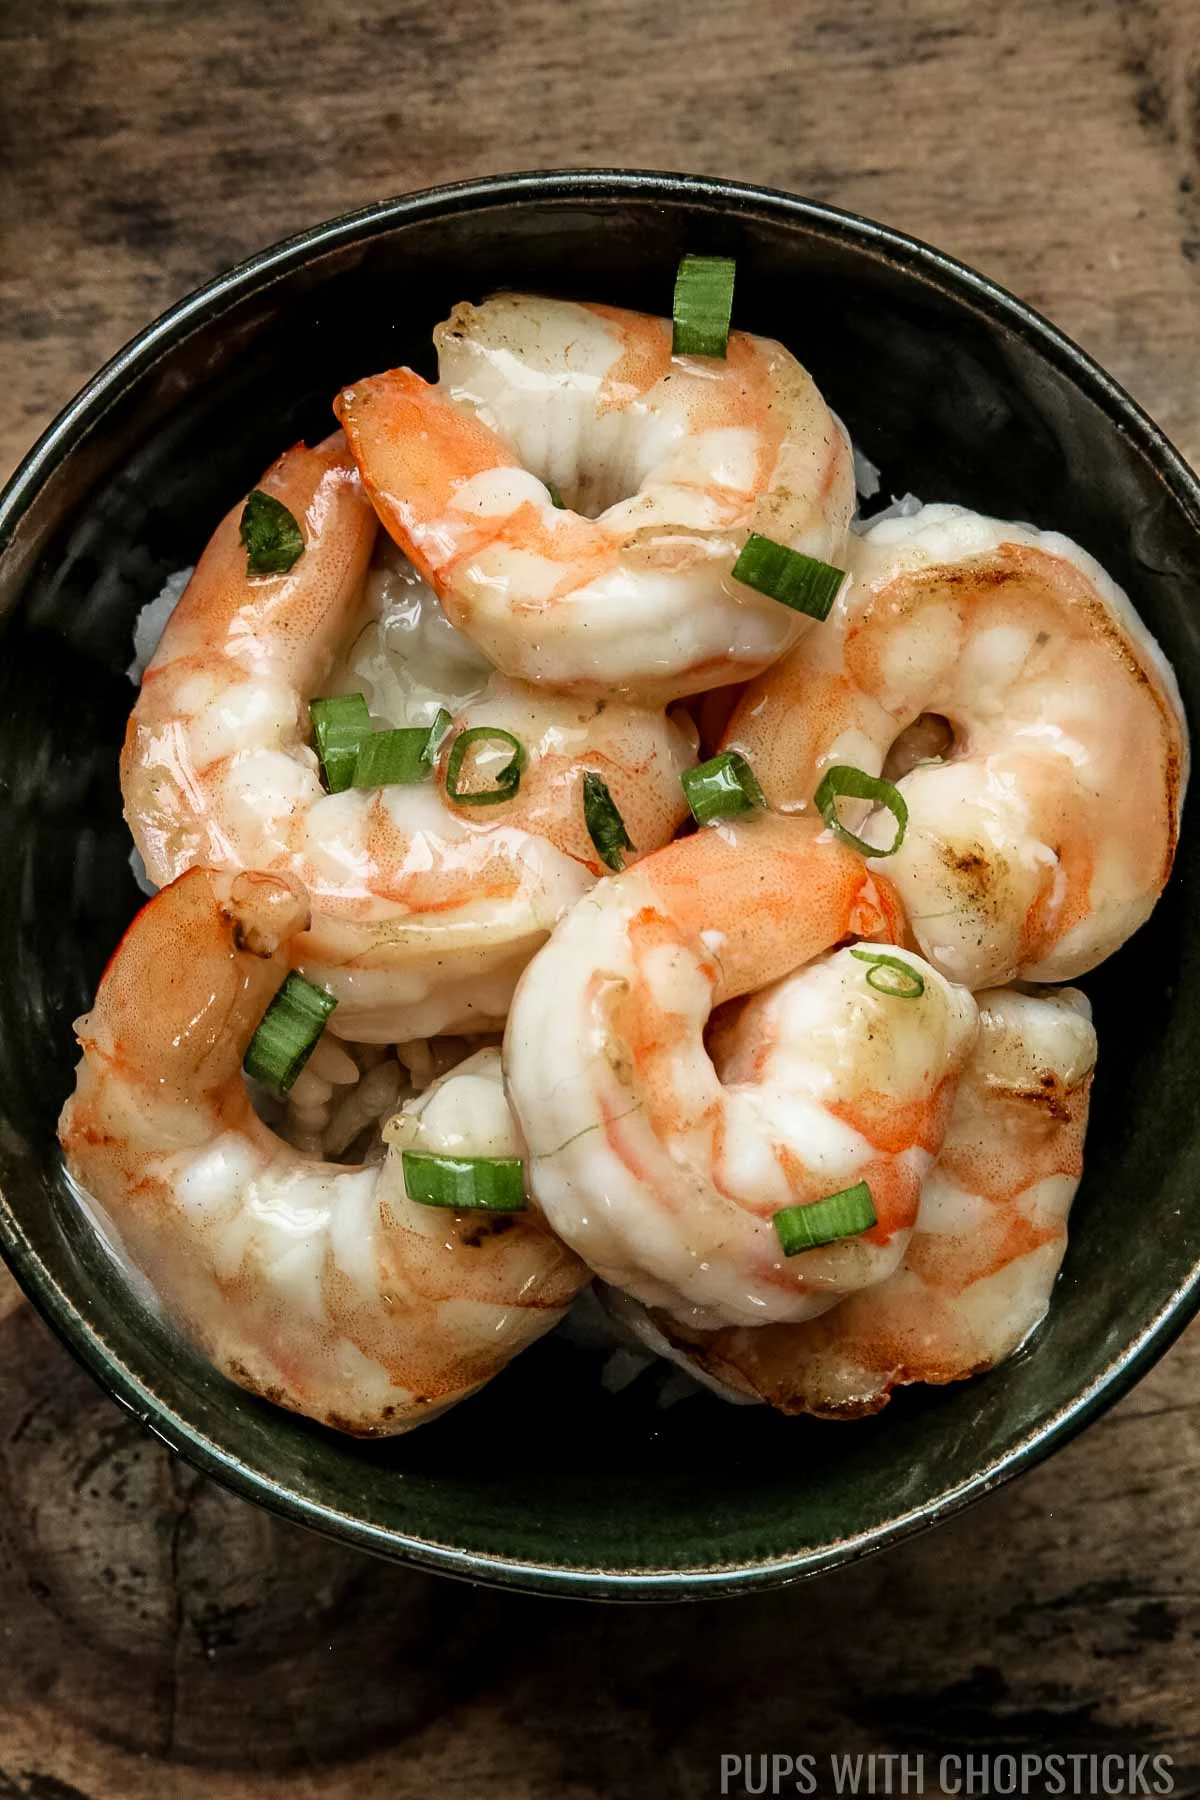 Shrimp with Chinese white sauce tossed on it served with rice.